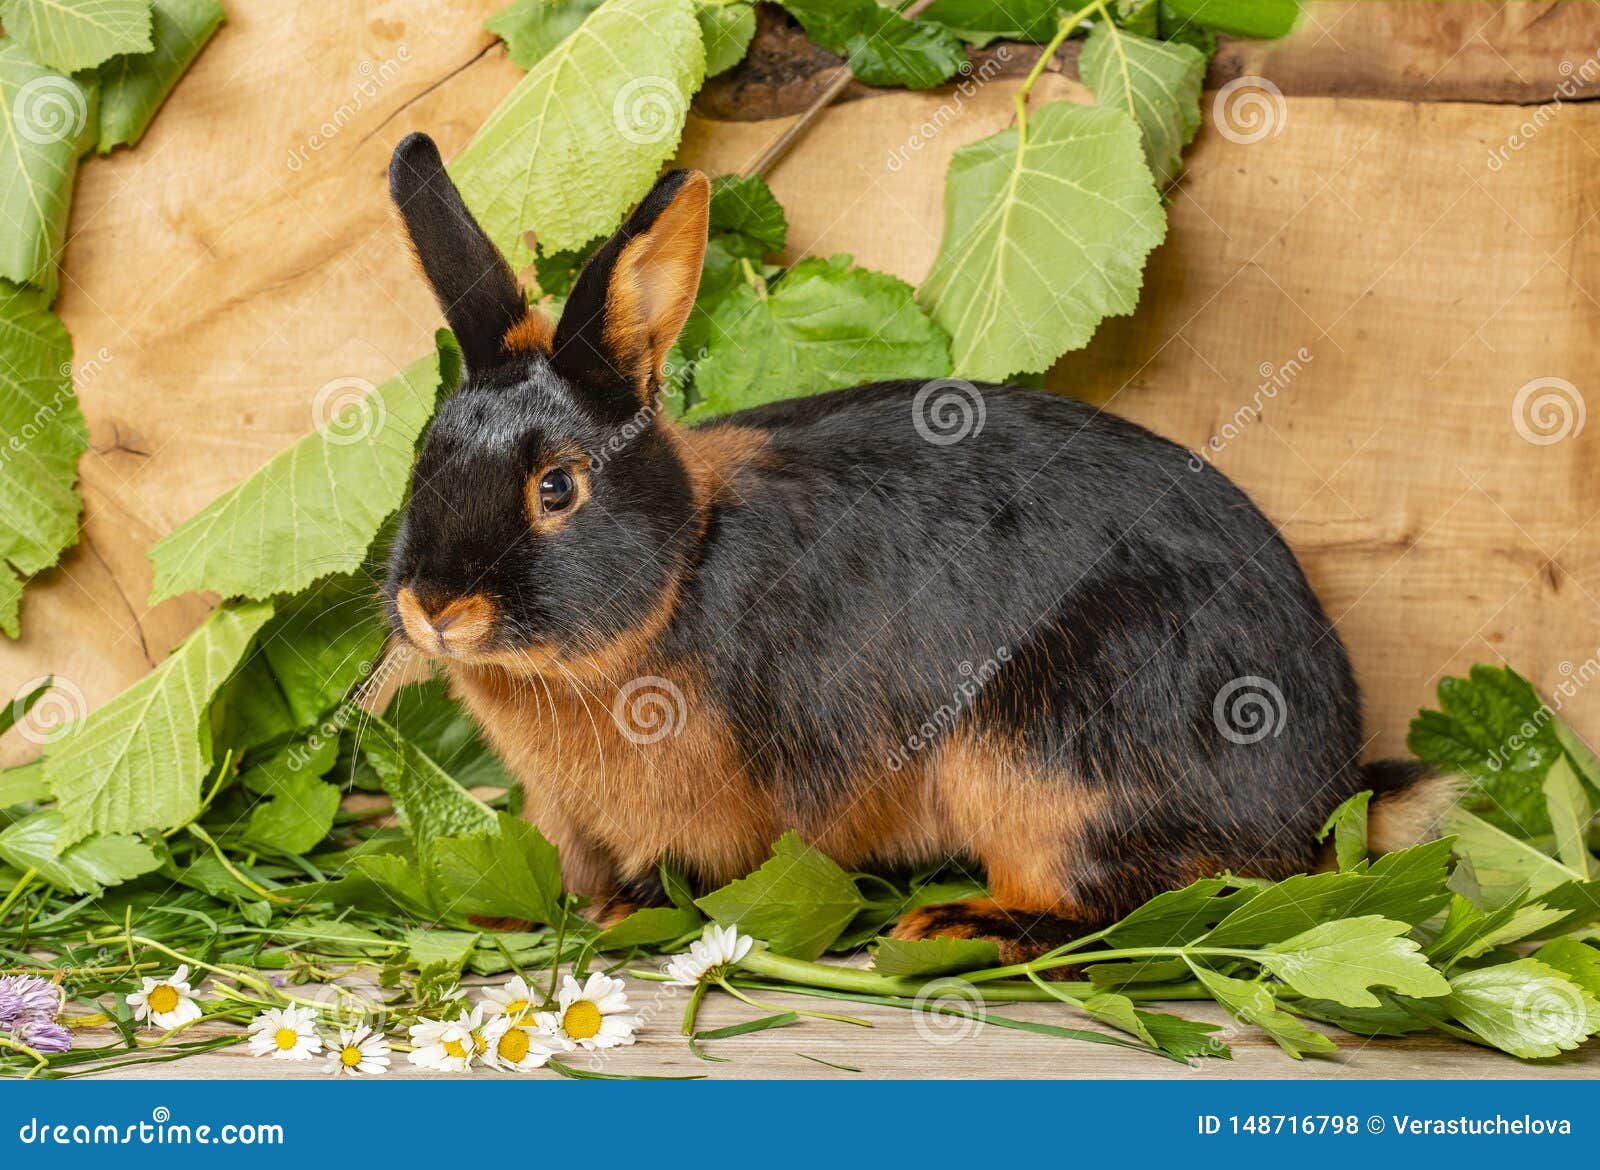 the tan rabbit on a wooden background with graas and leaves